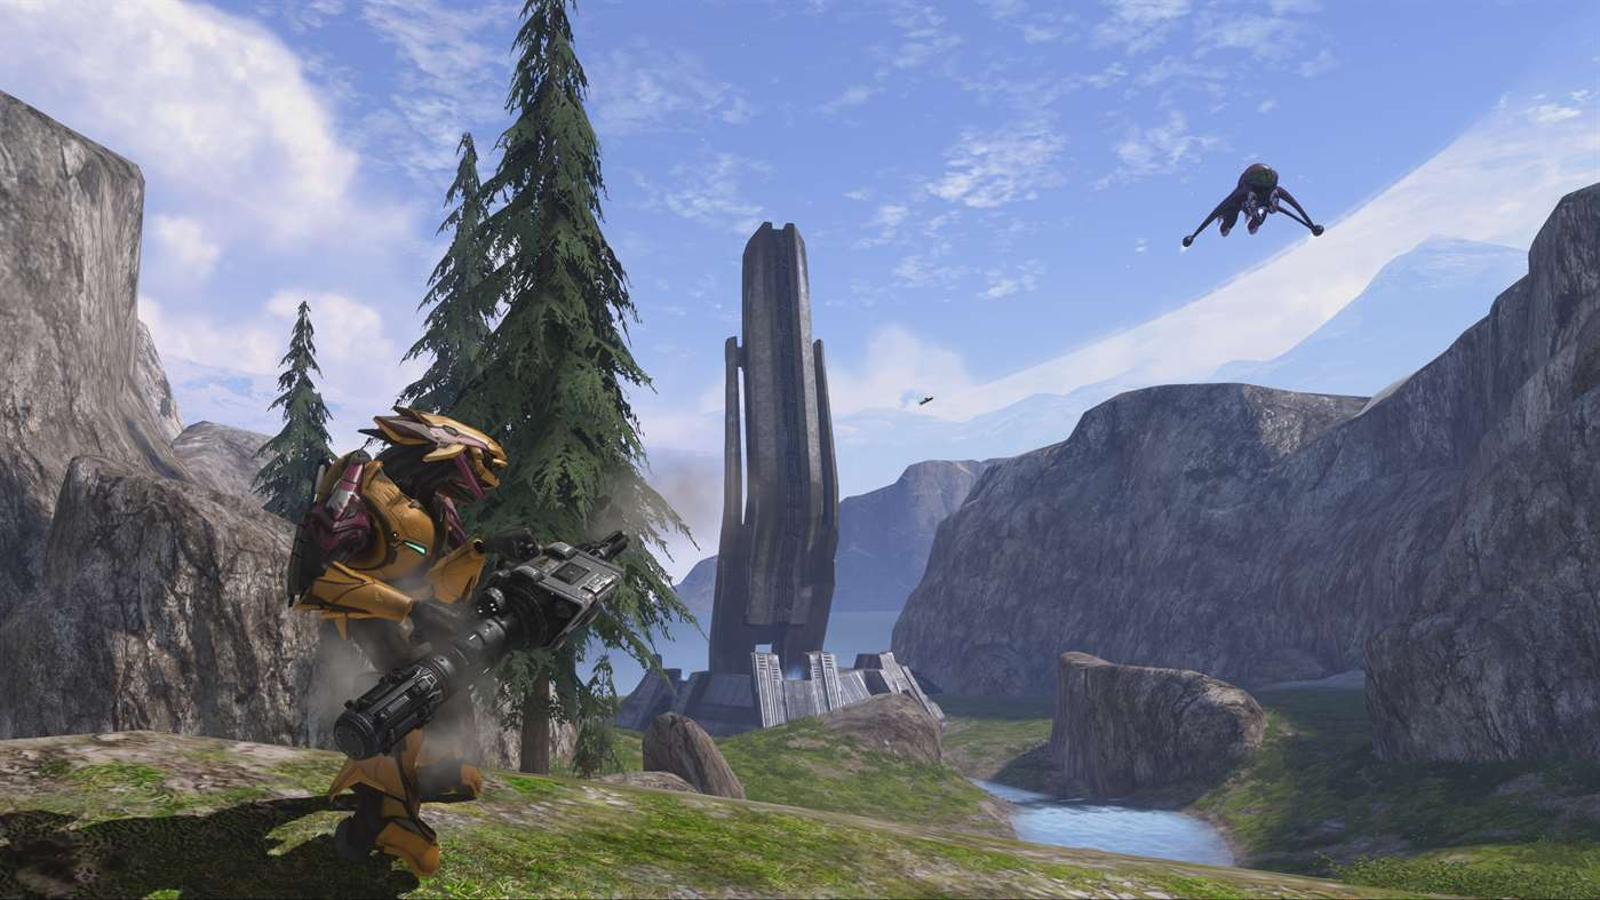 Halo: Reach now available for Xbox One, Windows 10 and Steam, plus